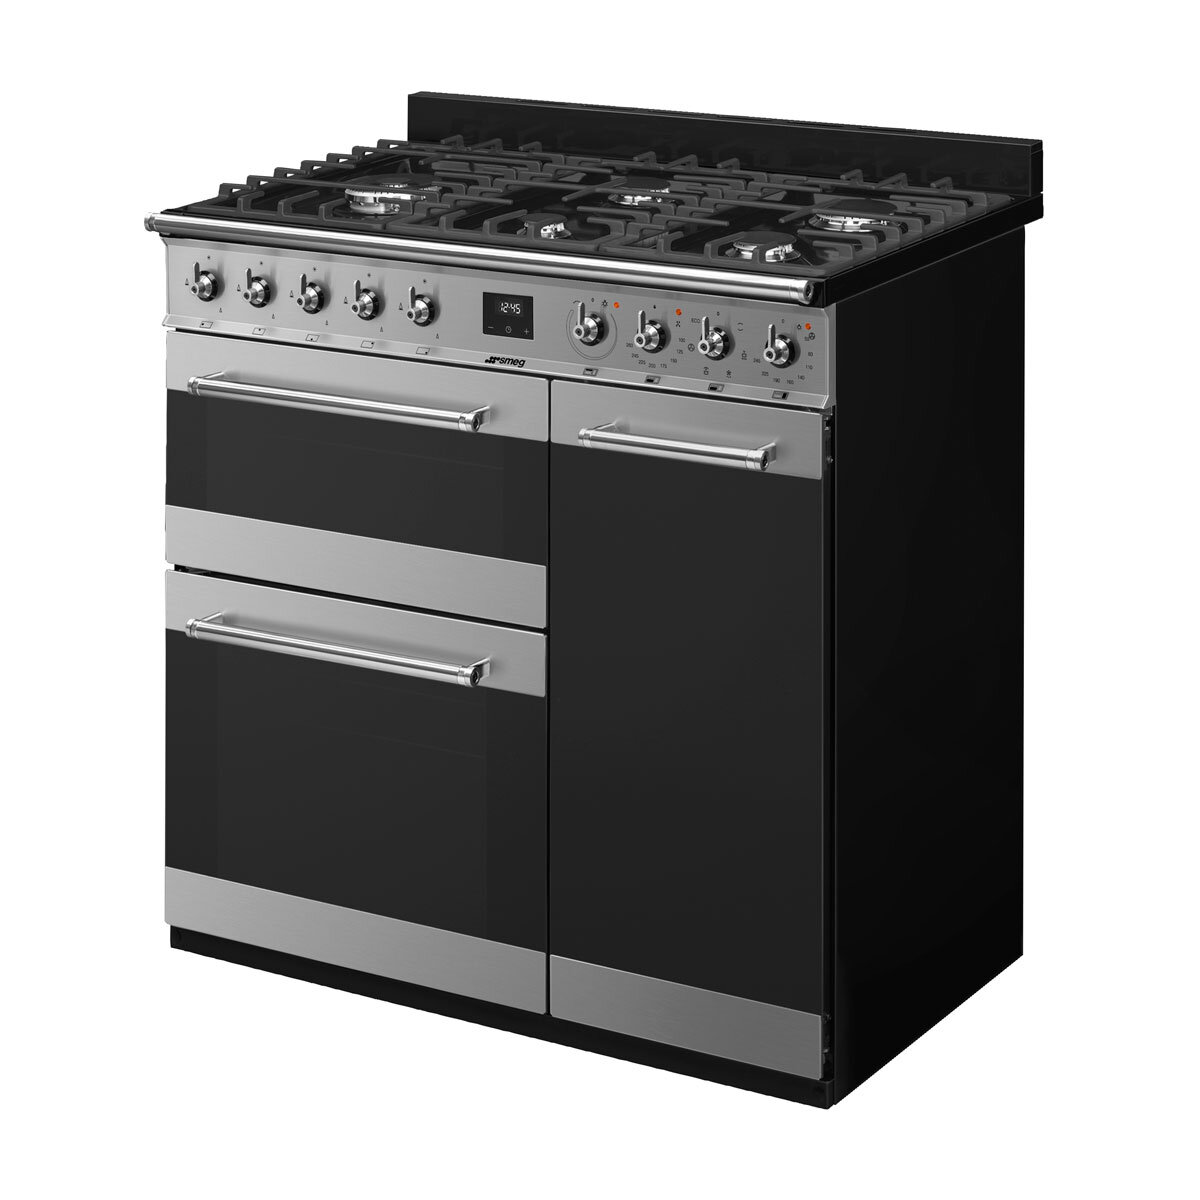 Angled view SY93-1 90cm Symphony Dual Fuel Range Cook Eclipse Glass